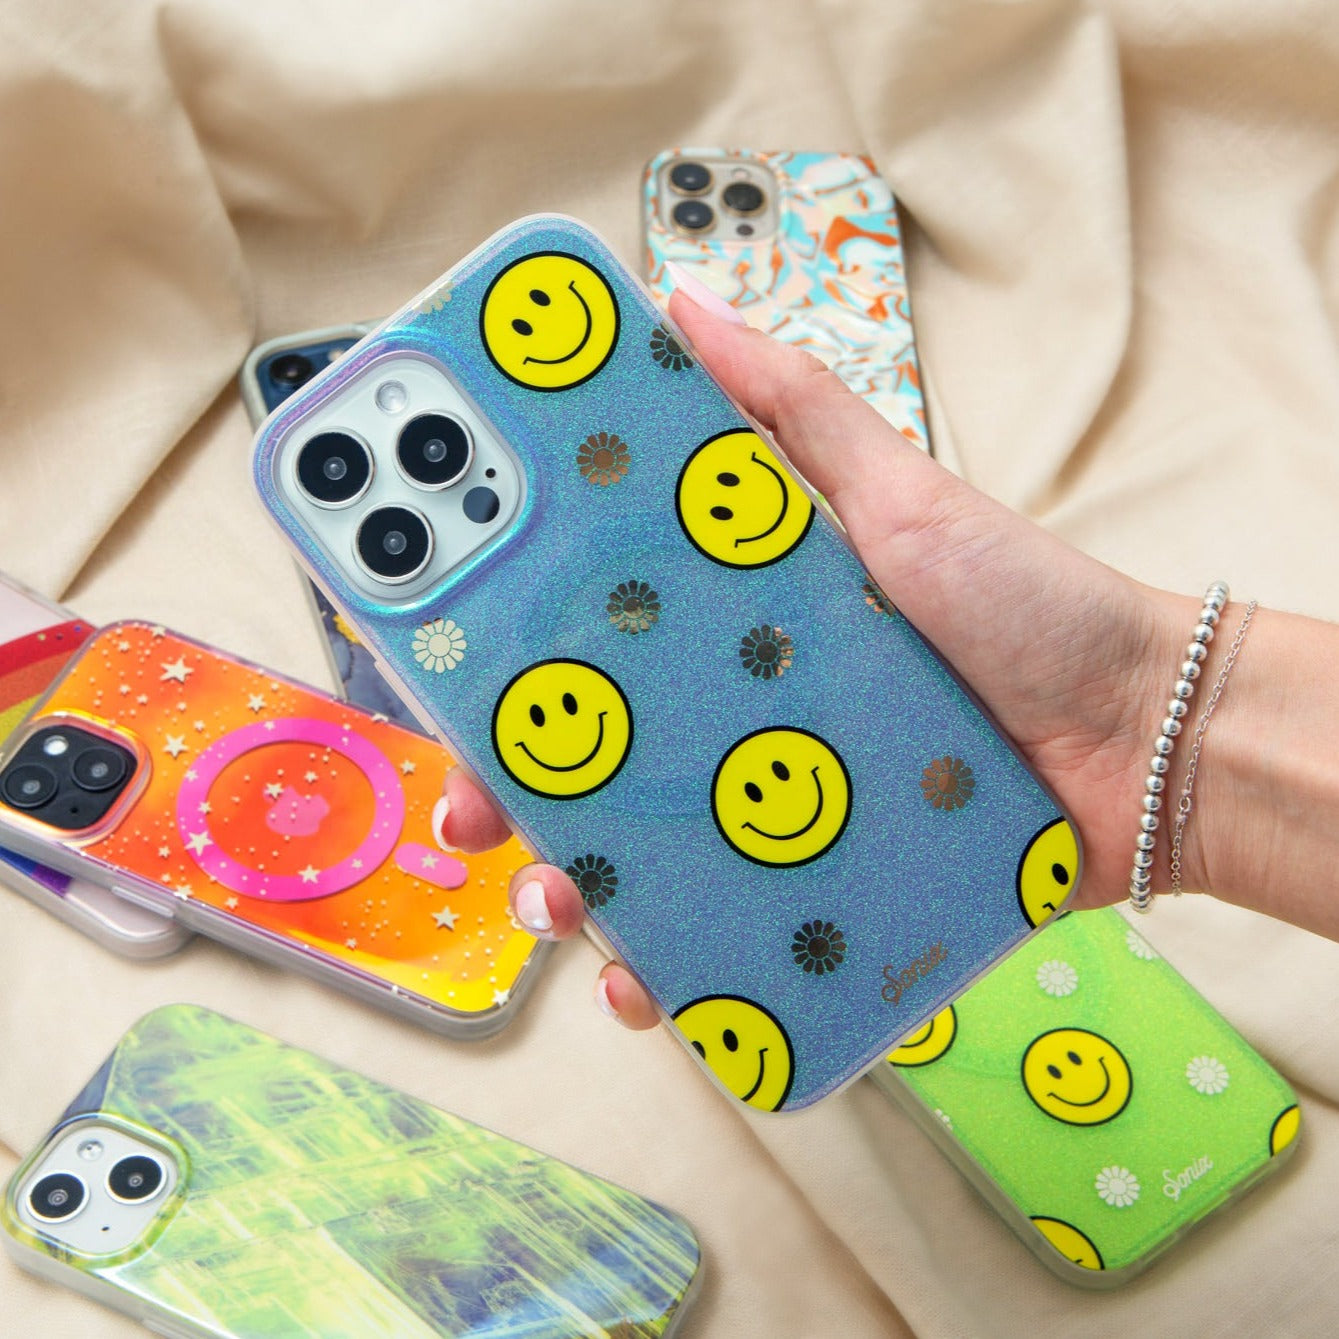 The clear purple case infused with iridescent glitter features happy faces and signature gold foil flowers shown on an iphone being held by a hand and other phone cases in the background